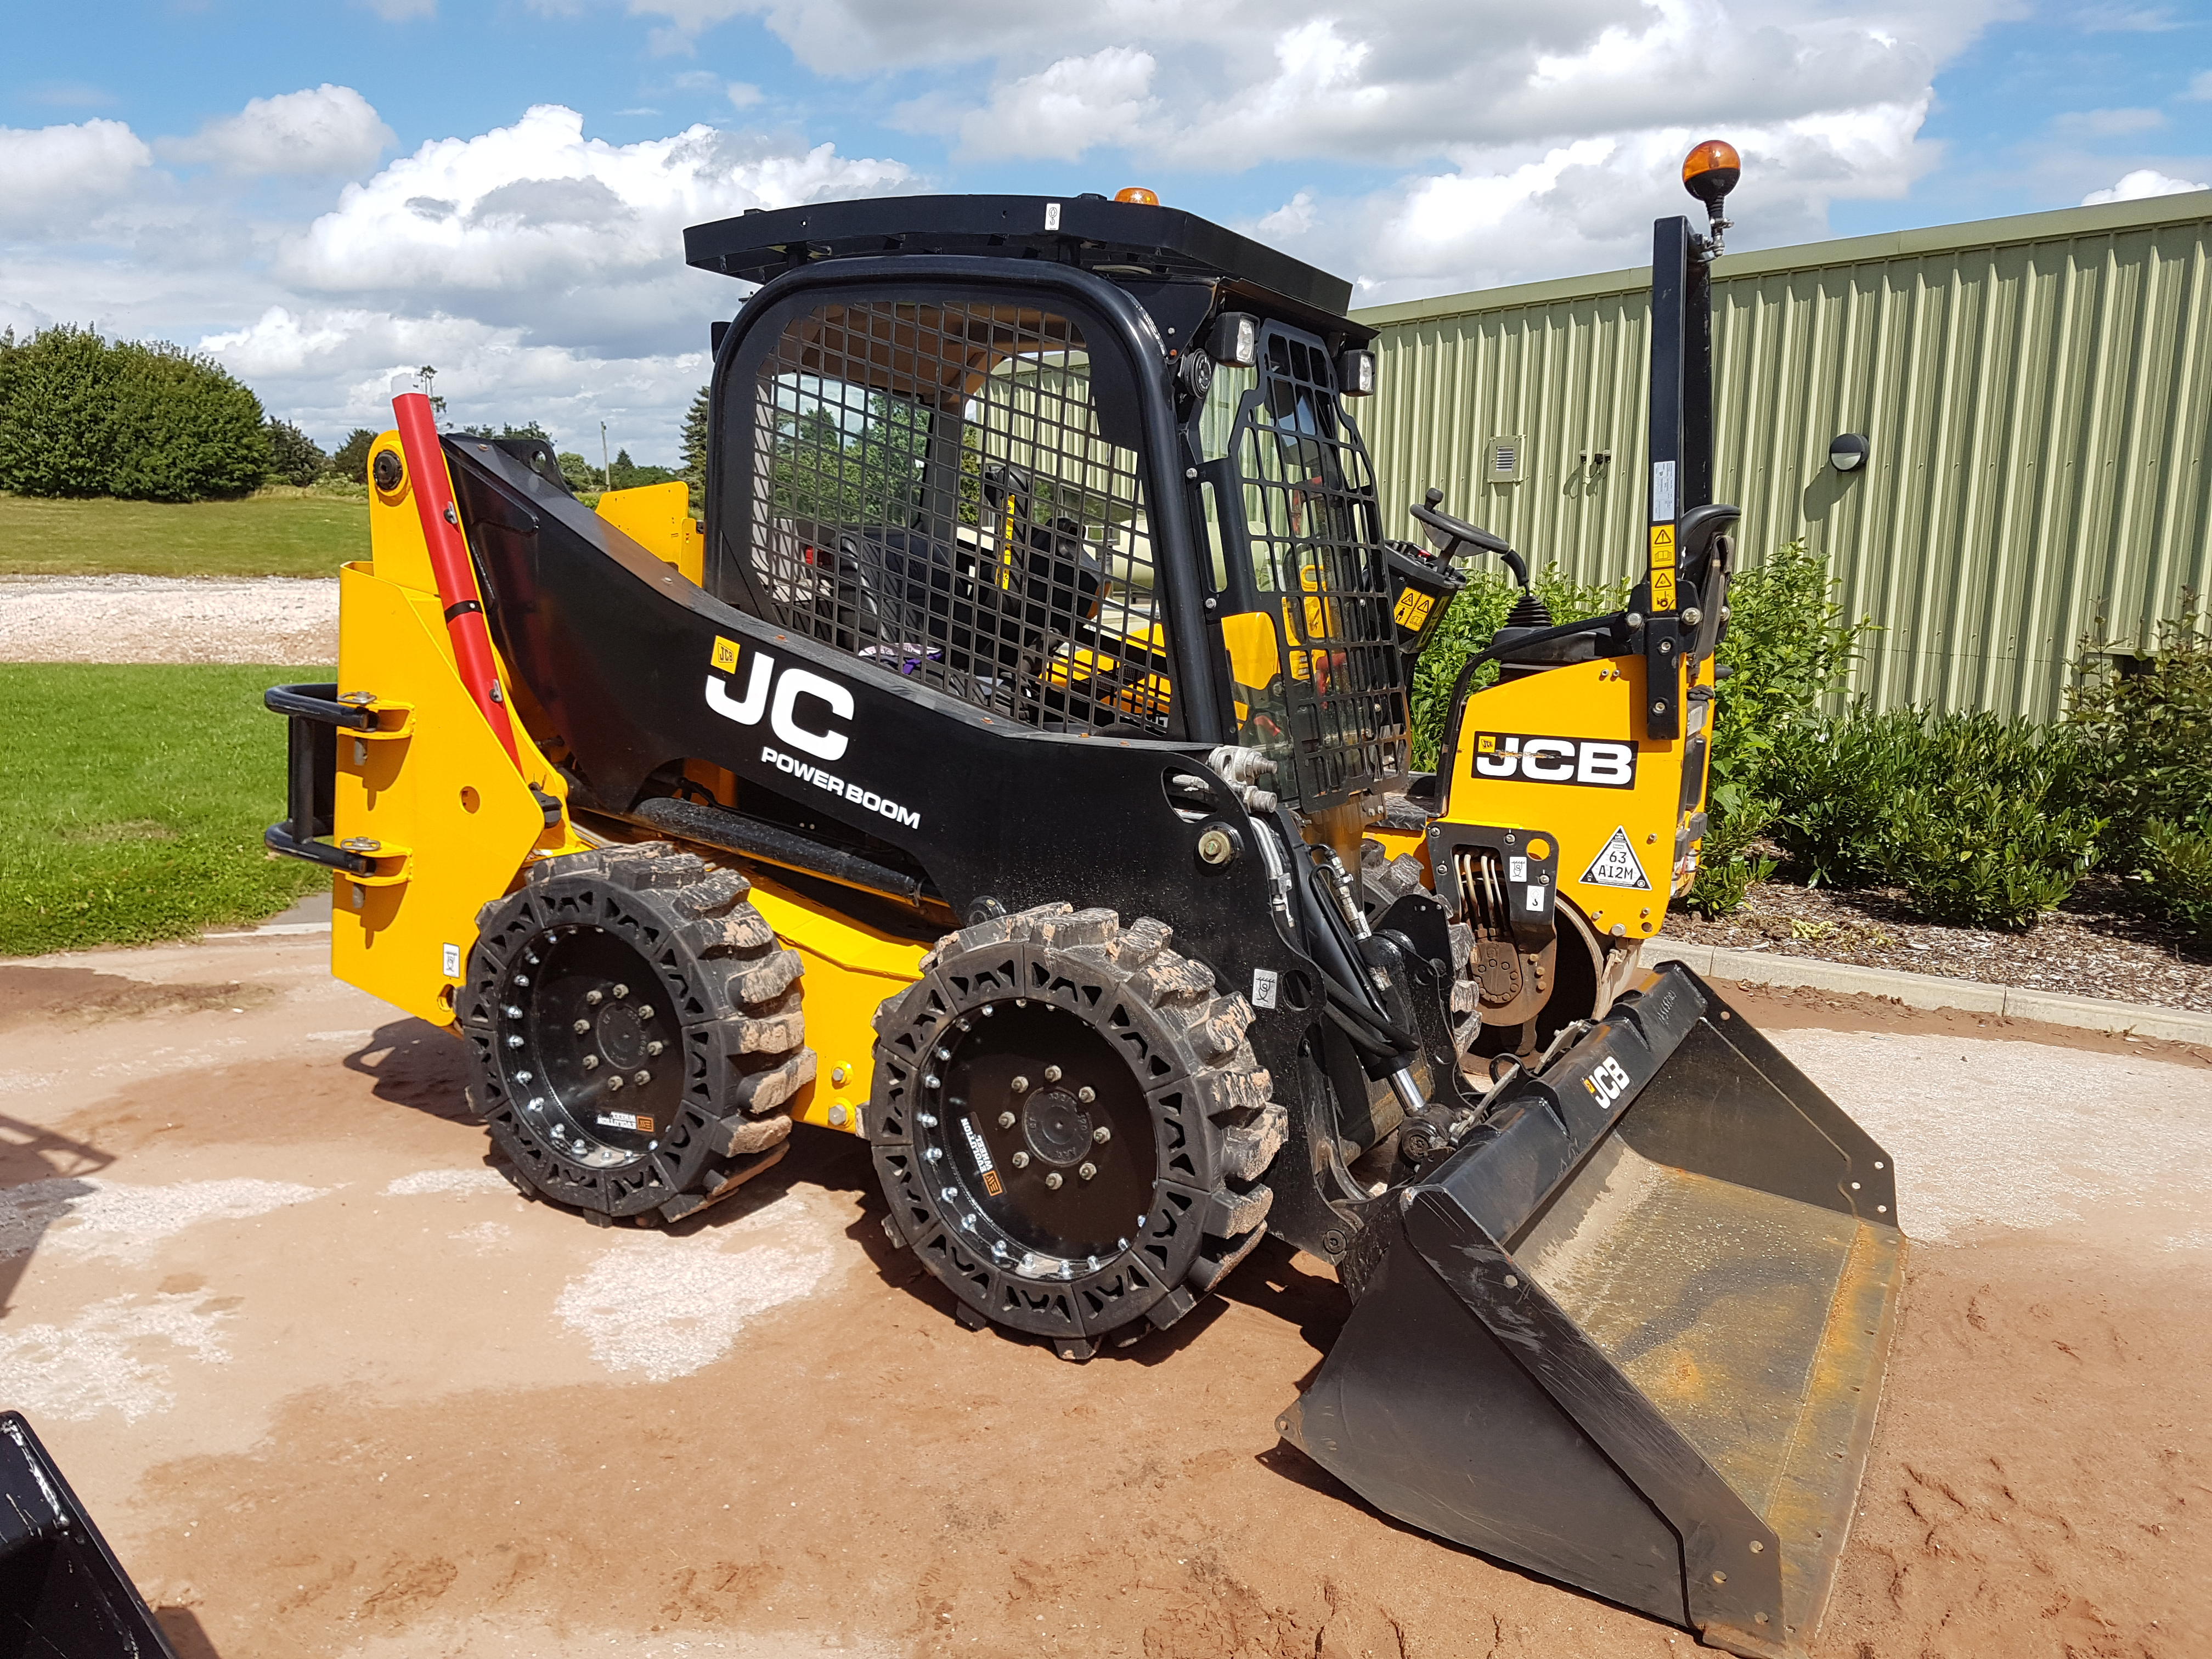 This images shows a yellow JCB Skid Steer using our solid skid steer tires.